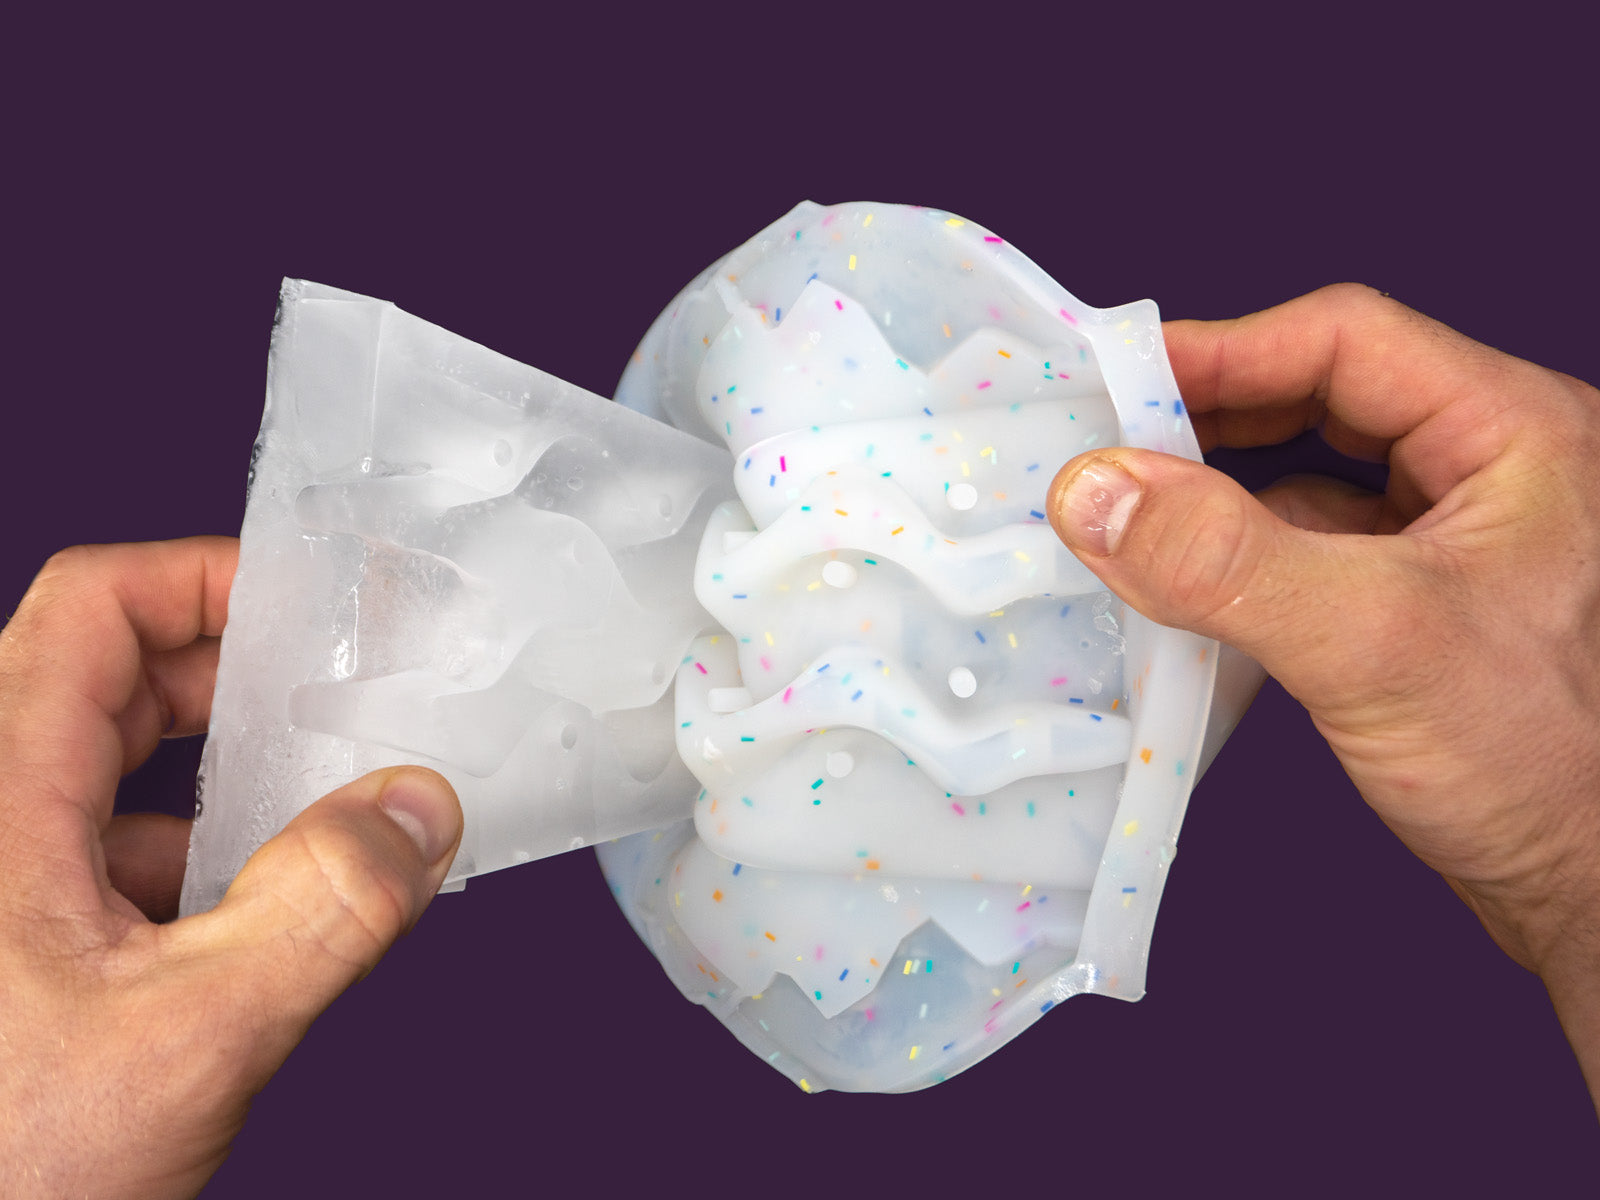 Photo of a white speckled plastic mould being peeled away from the frozen water inside it by a pair of hands.The image is set against a purple backdrop, viewed from the back.Photo of a white speckled plastic mould has been separated from the frozen water inside. 1 hand is holding the mold, the other the ice.The image is set against a purple backdrop, viewed from the back.